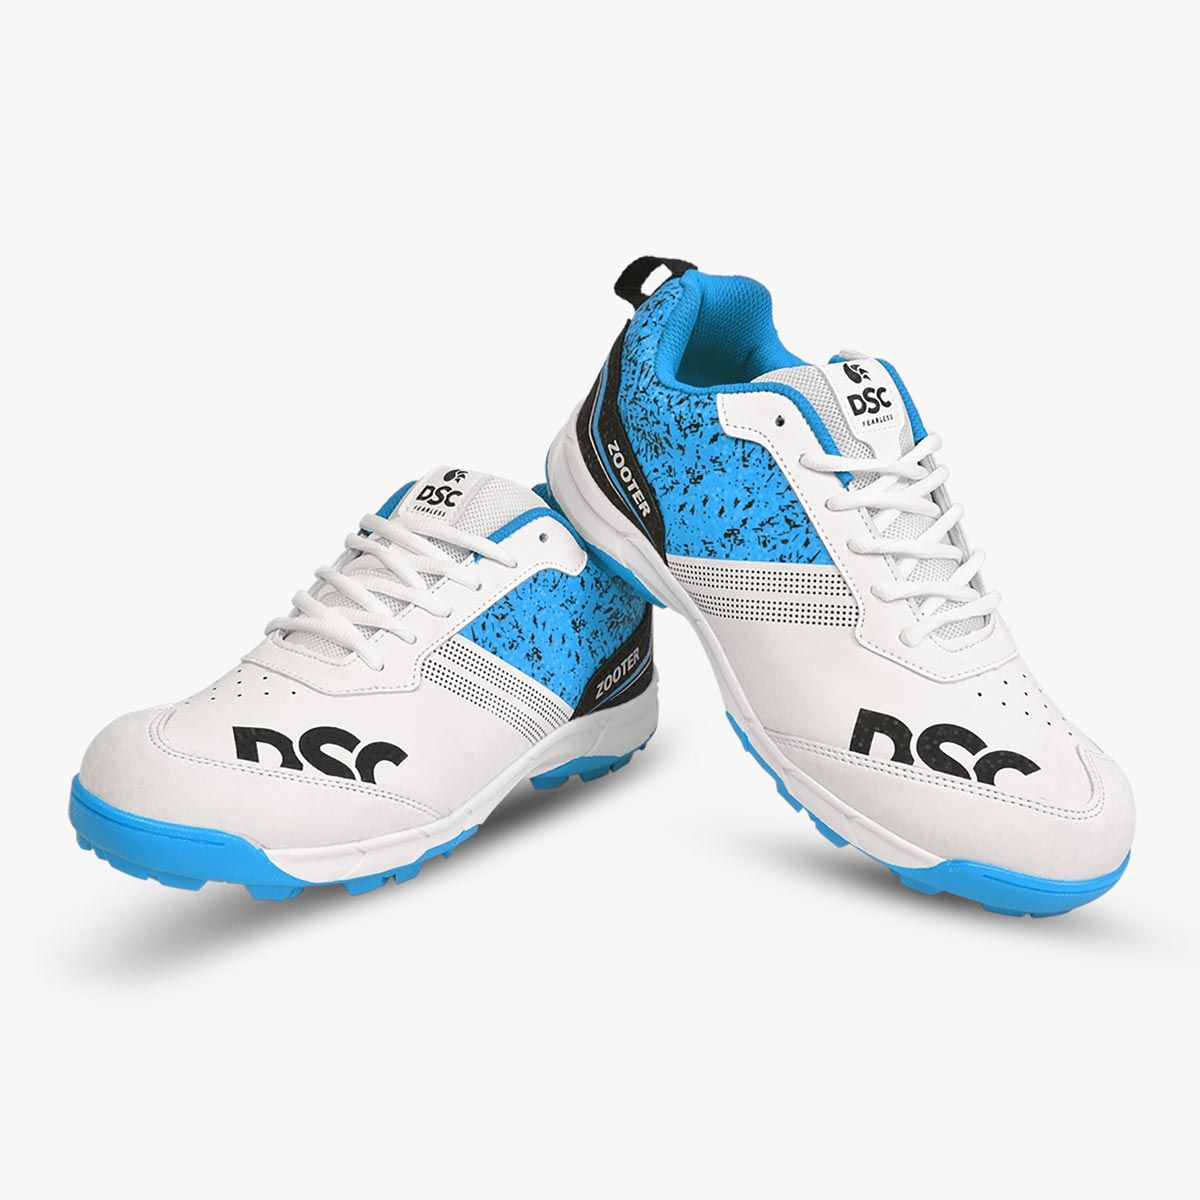 DSC Zooter Cricket Shoes Blue and White